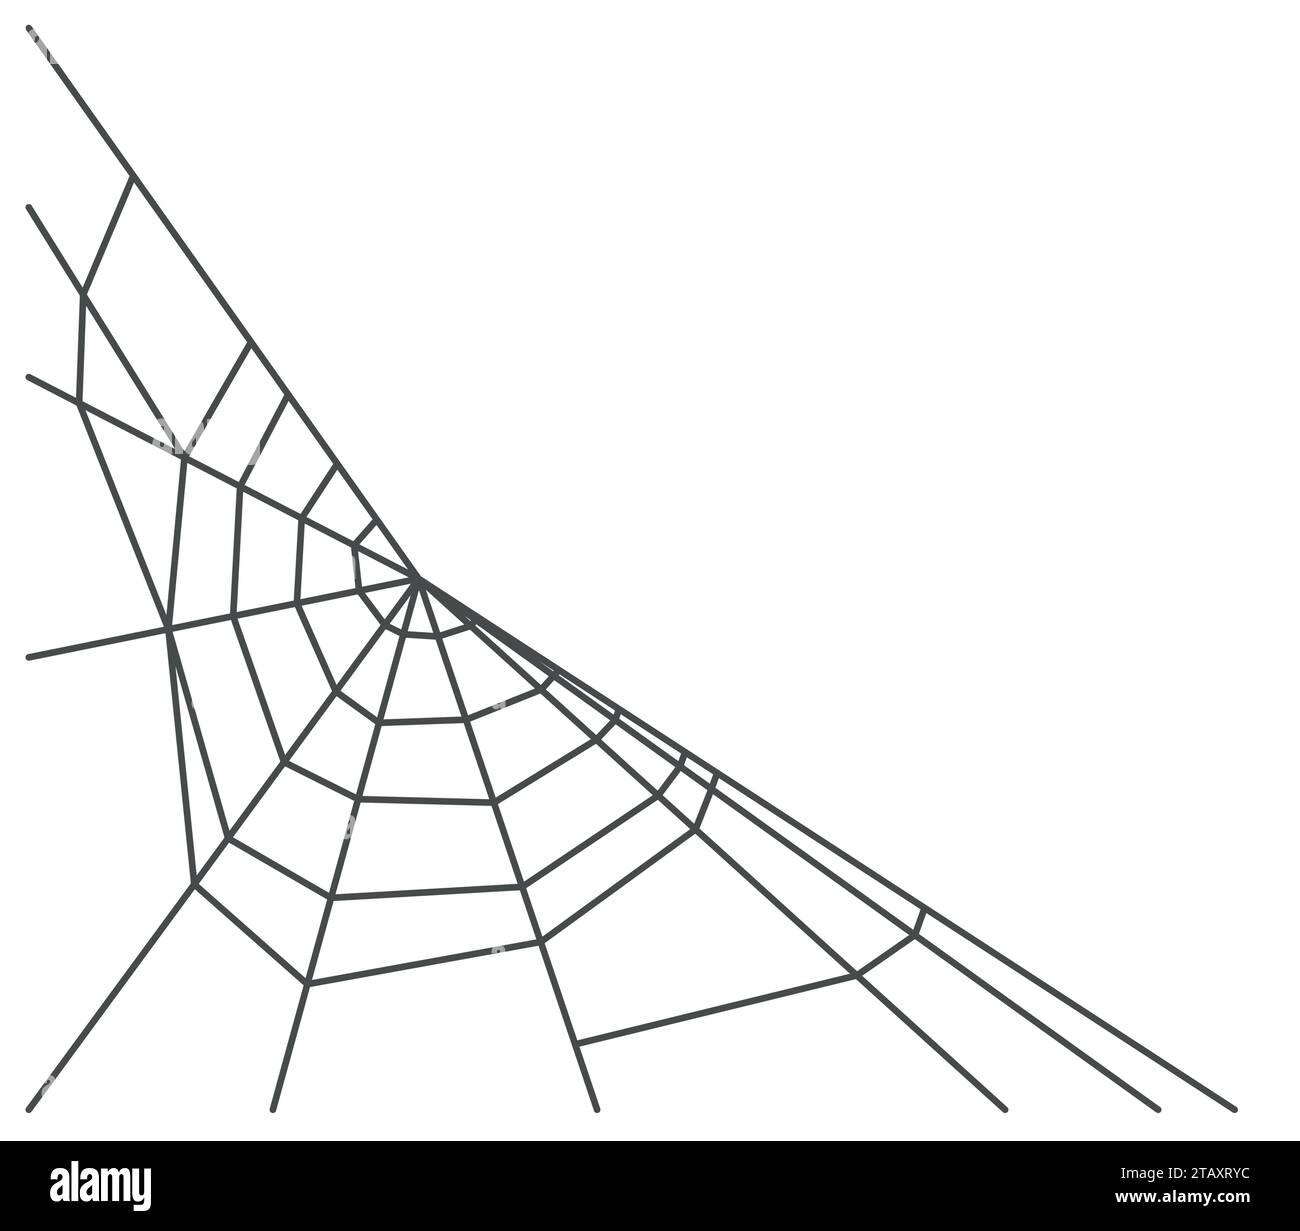 Spider web isolated on white background. Vector illustration Stock Vector